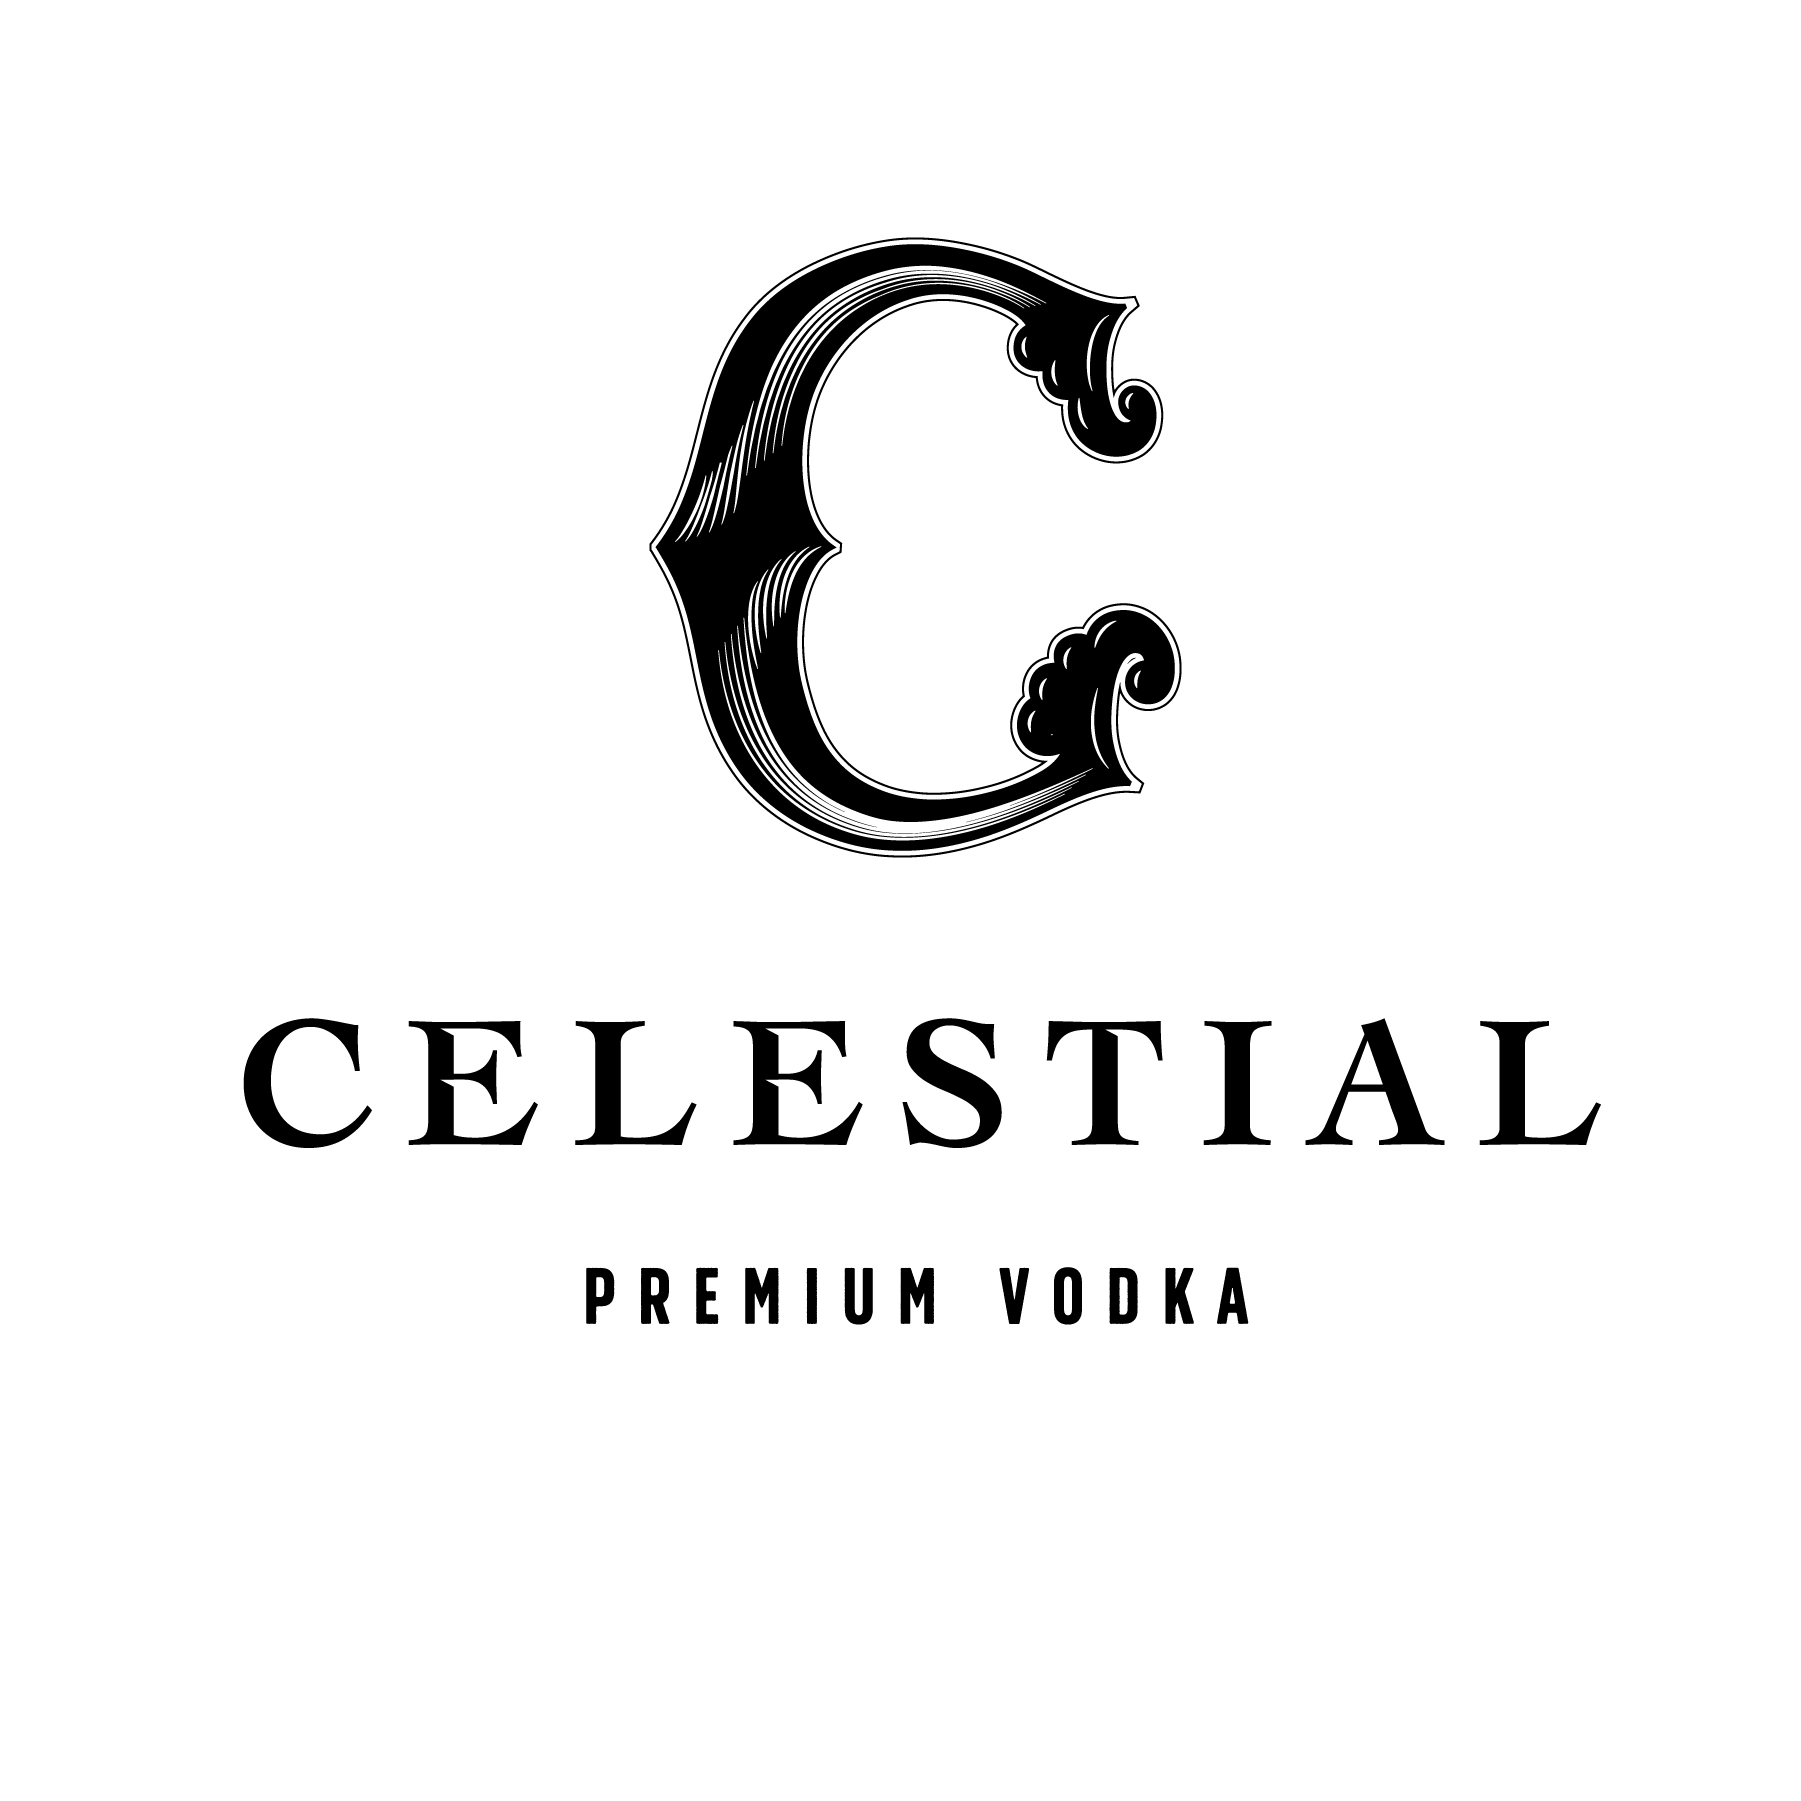 Celestial Icon and Wordmark logo design by logo designer Adam Greasley (Oakfold) for your inspiration and for the worlds largest logo competition